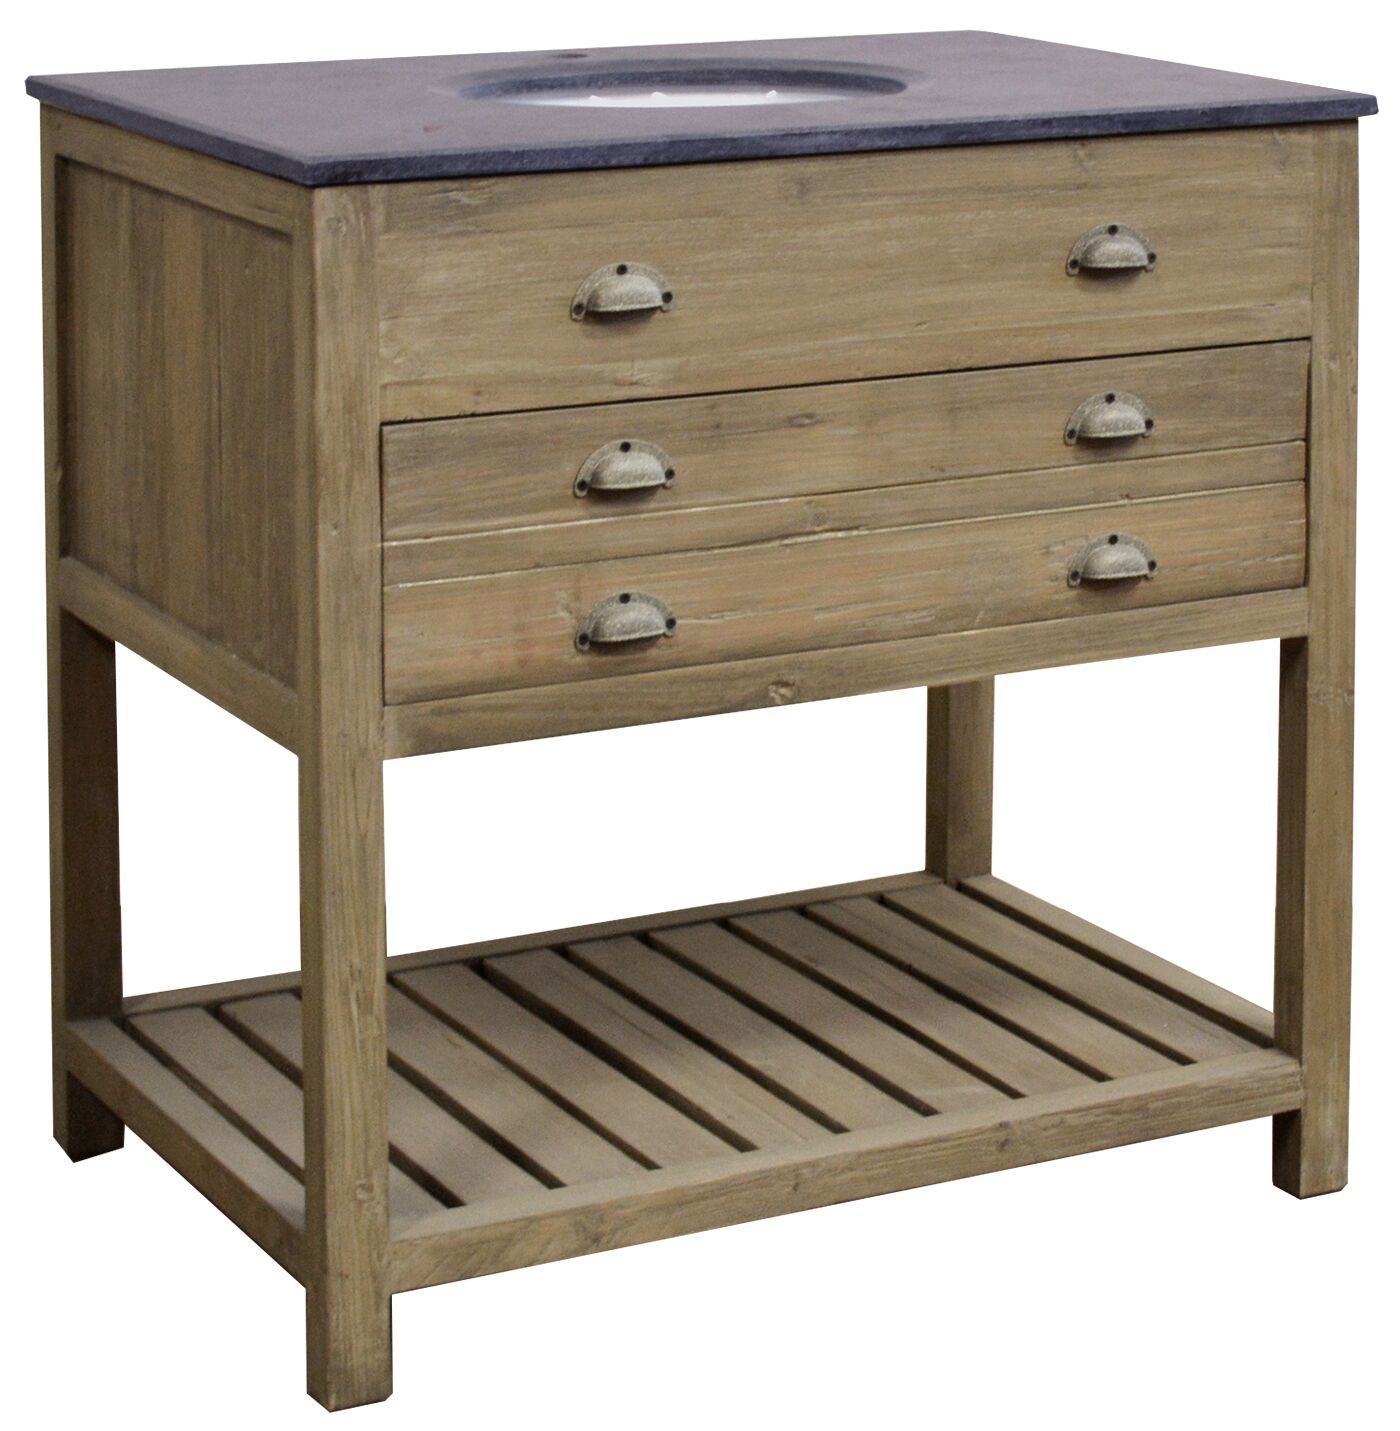 36" Handcrafted Reclaimed Pine Solid Wood Single Bath Vanity Wash Finish with Natural Asian Blue Stone Top